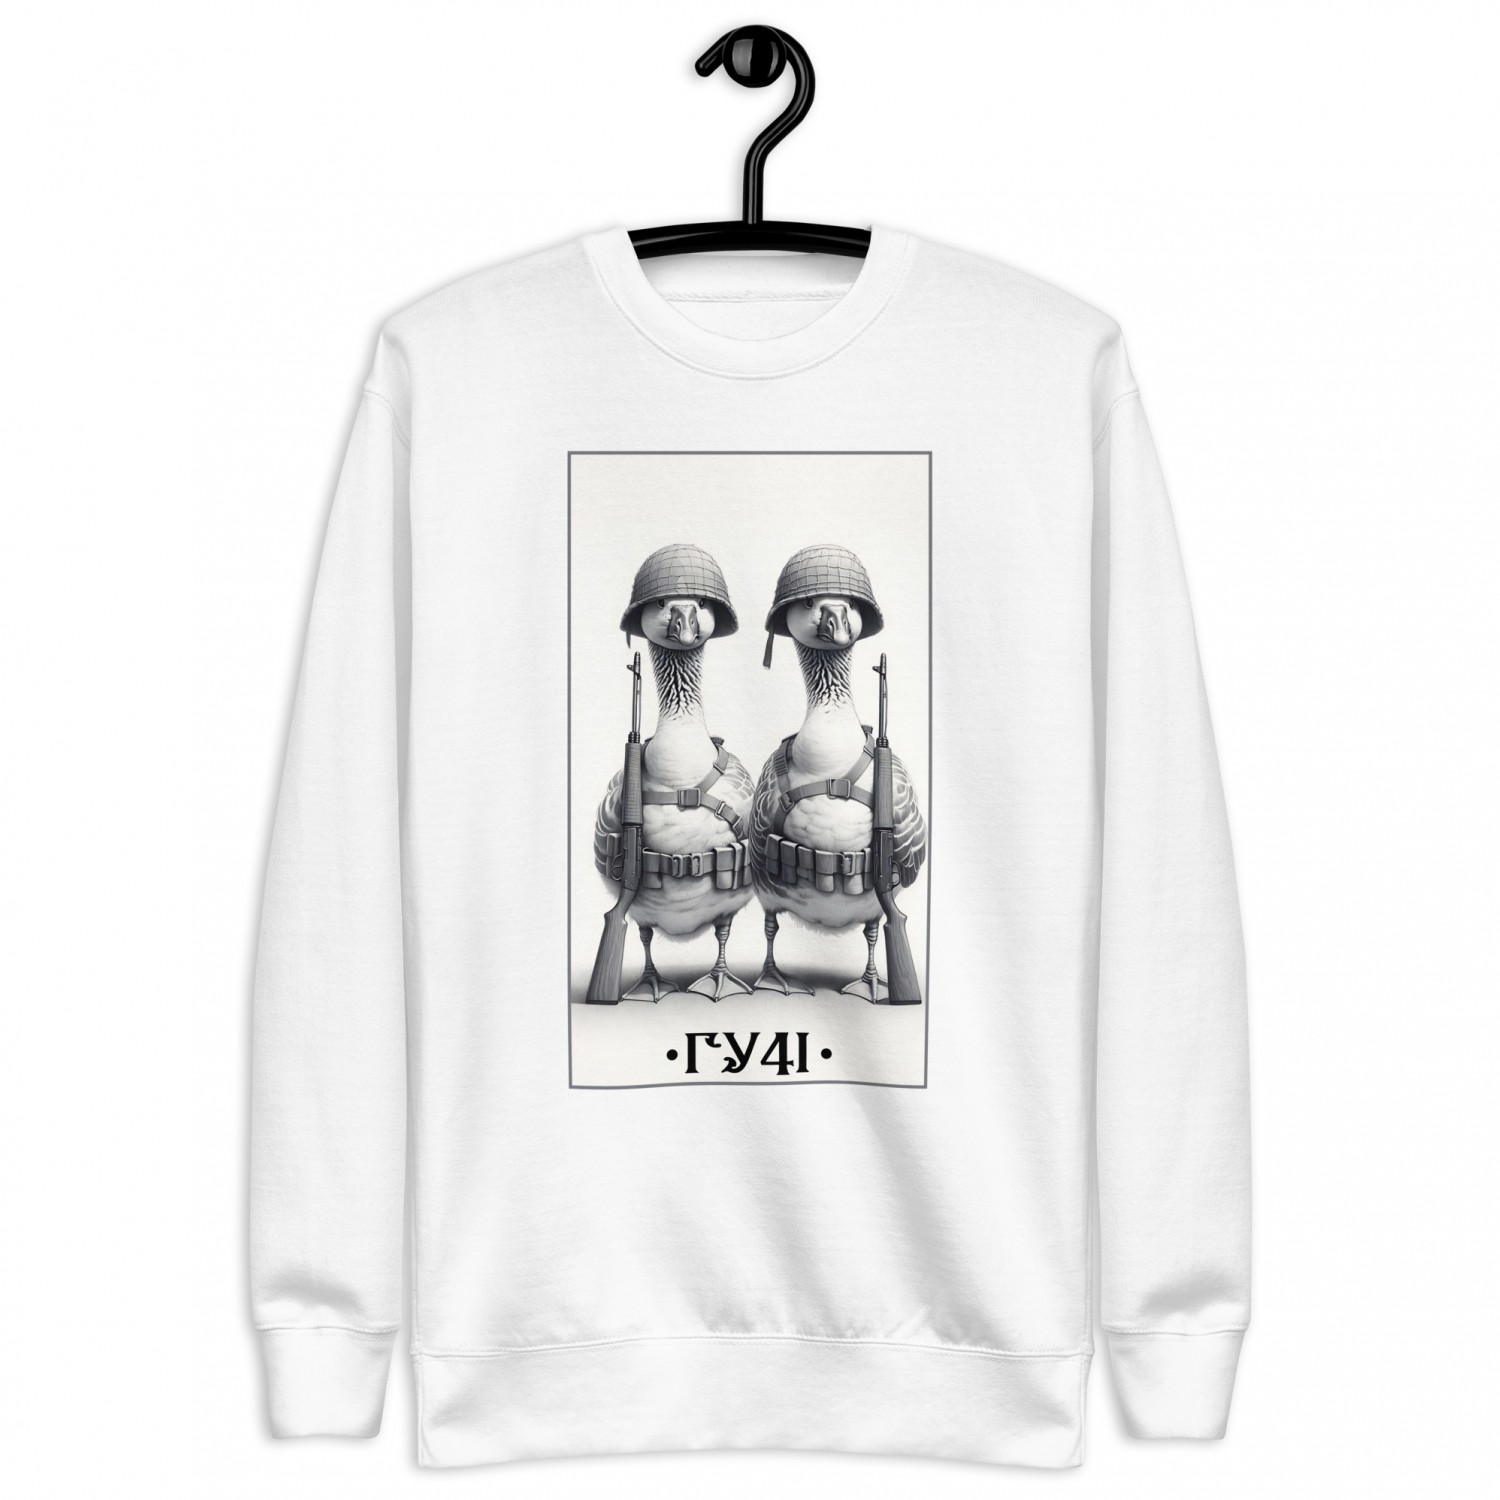 Buy a warm sweatshirt with a print of geese